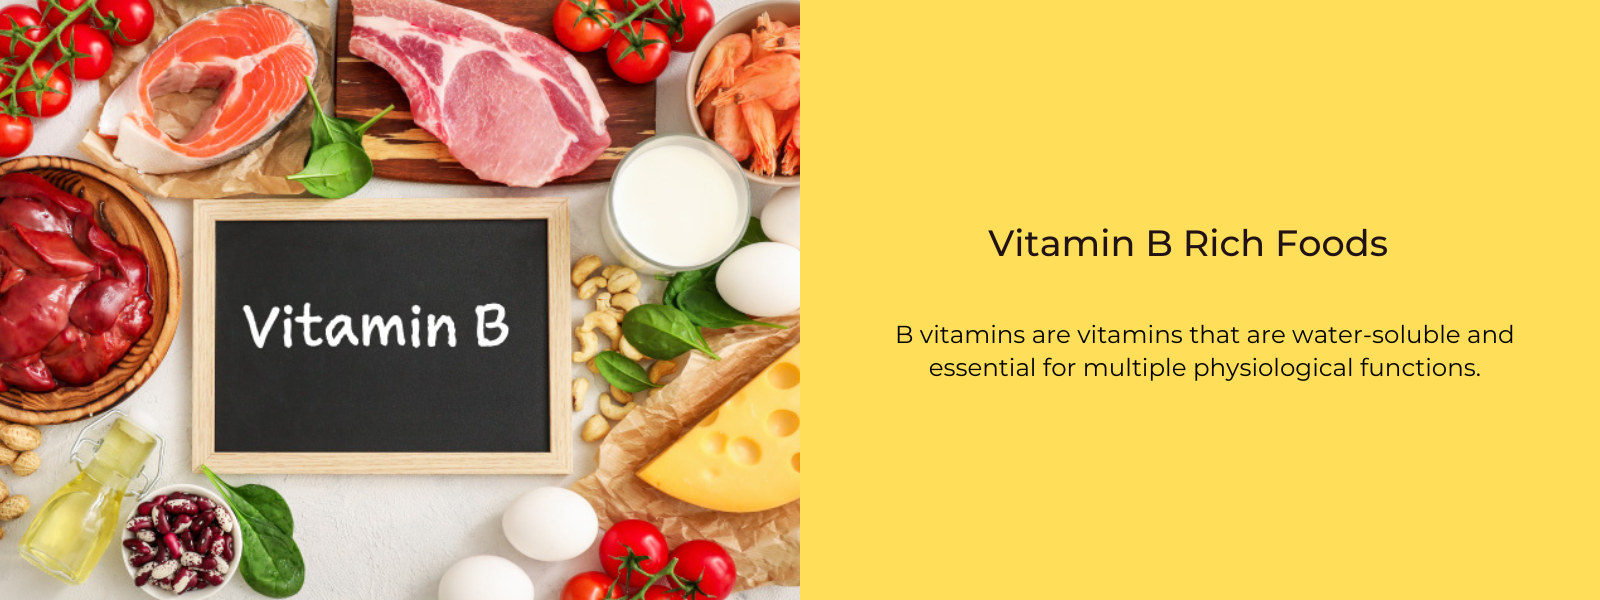 Vitamin B Rich Foods– Health Benefits, Uses and Important Facts